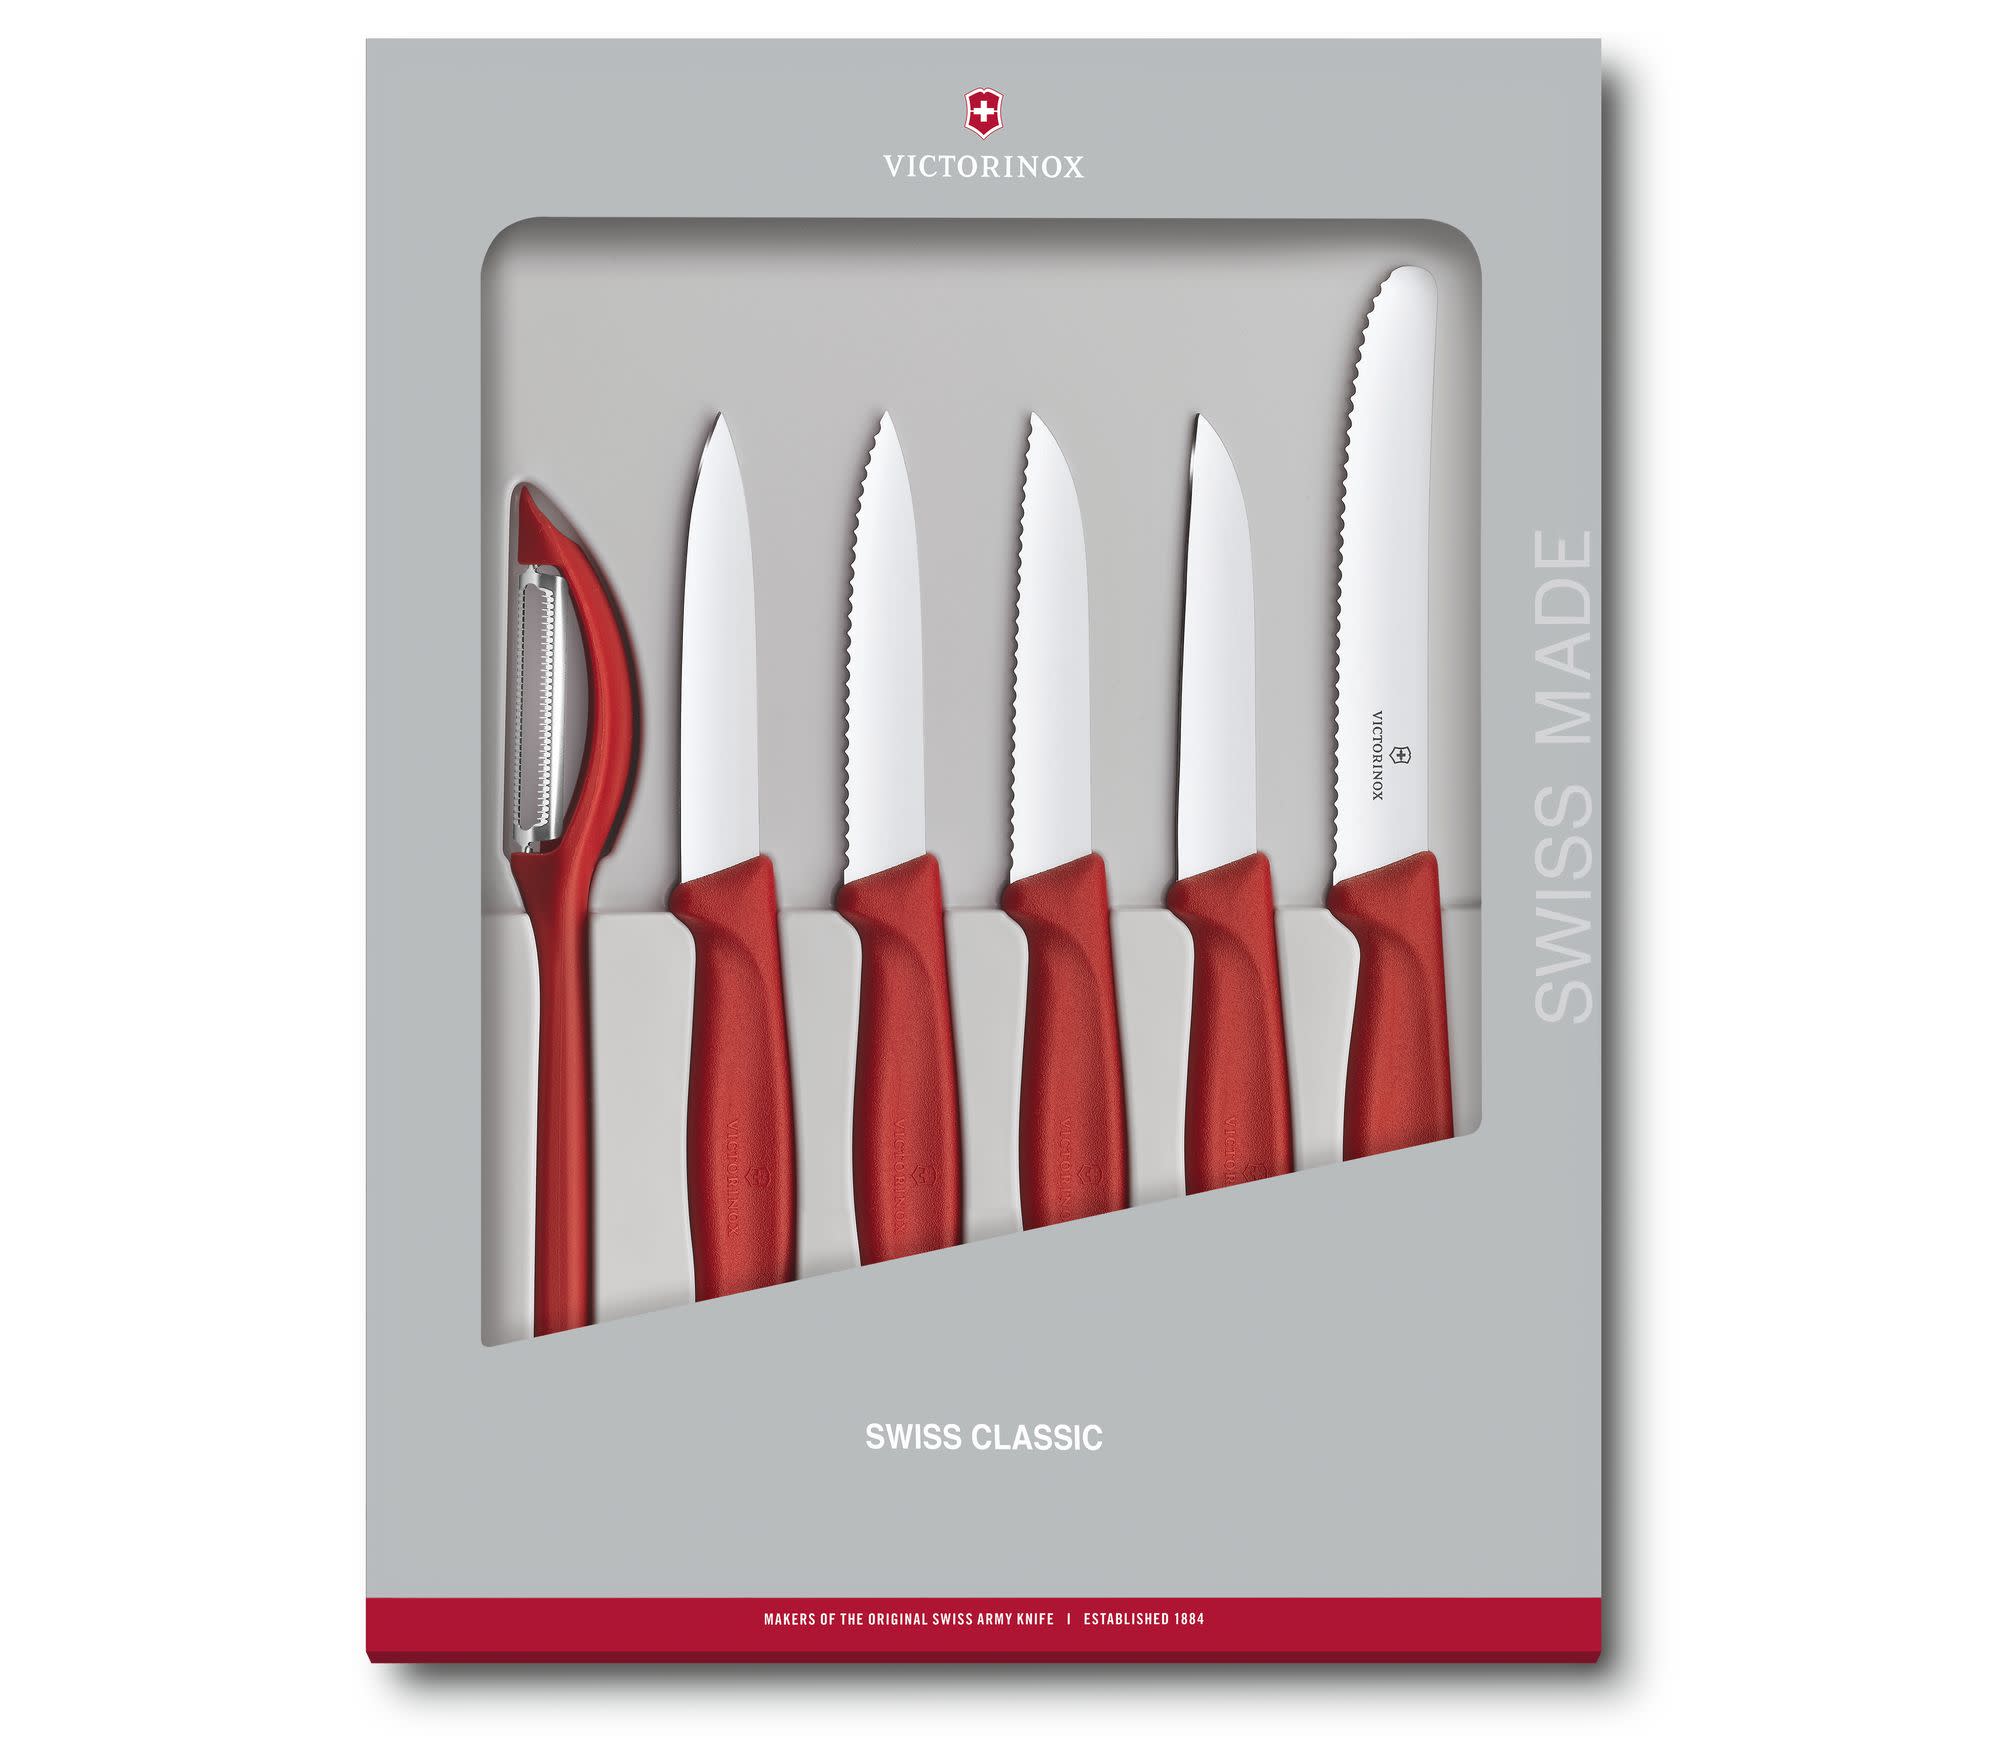 Victorinox Swiss Army Swiss Classic 6 Piece Knife Set Red Handle 6.7111.6G - image 1 of 20